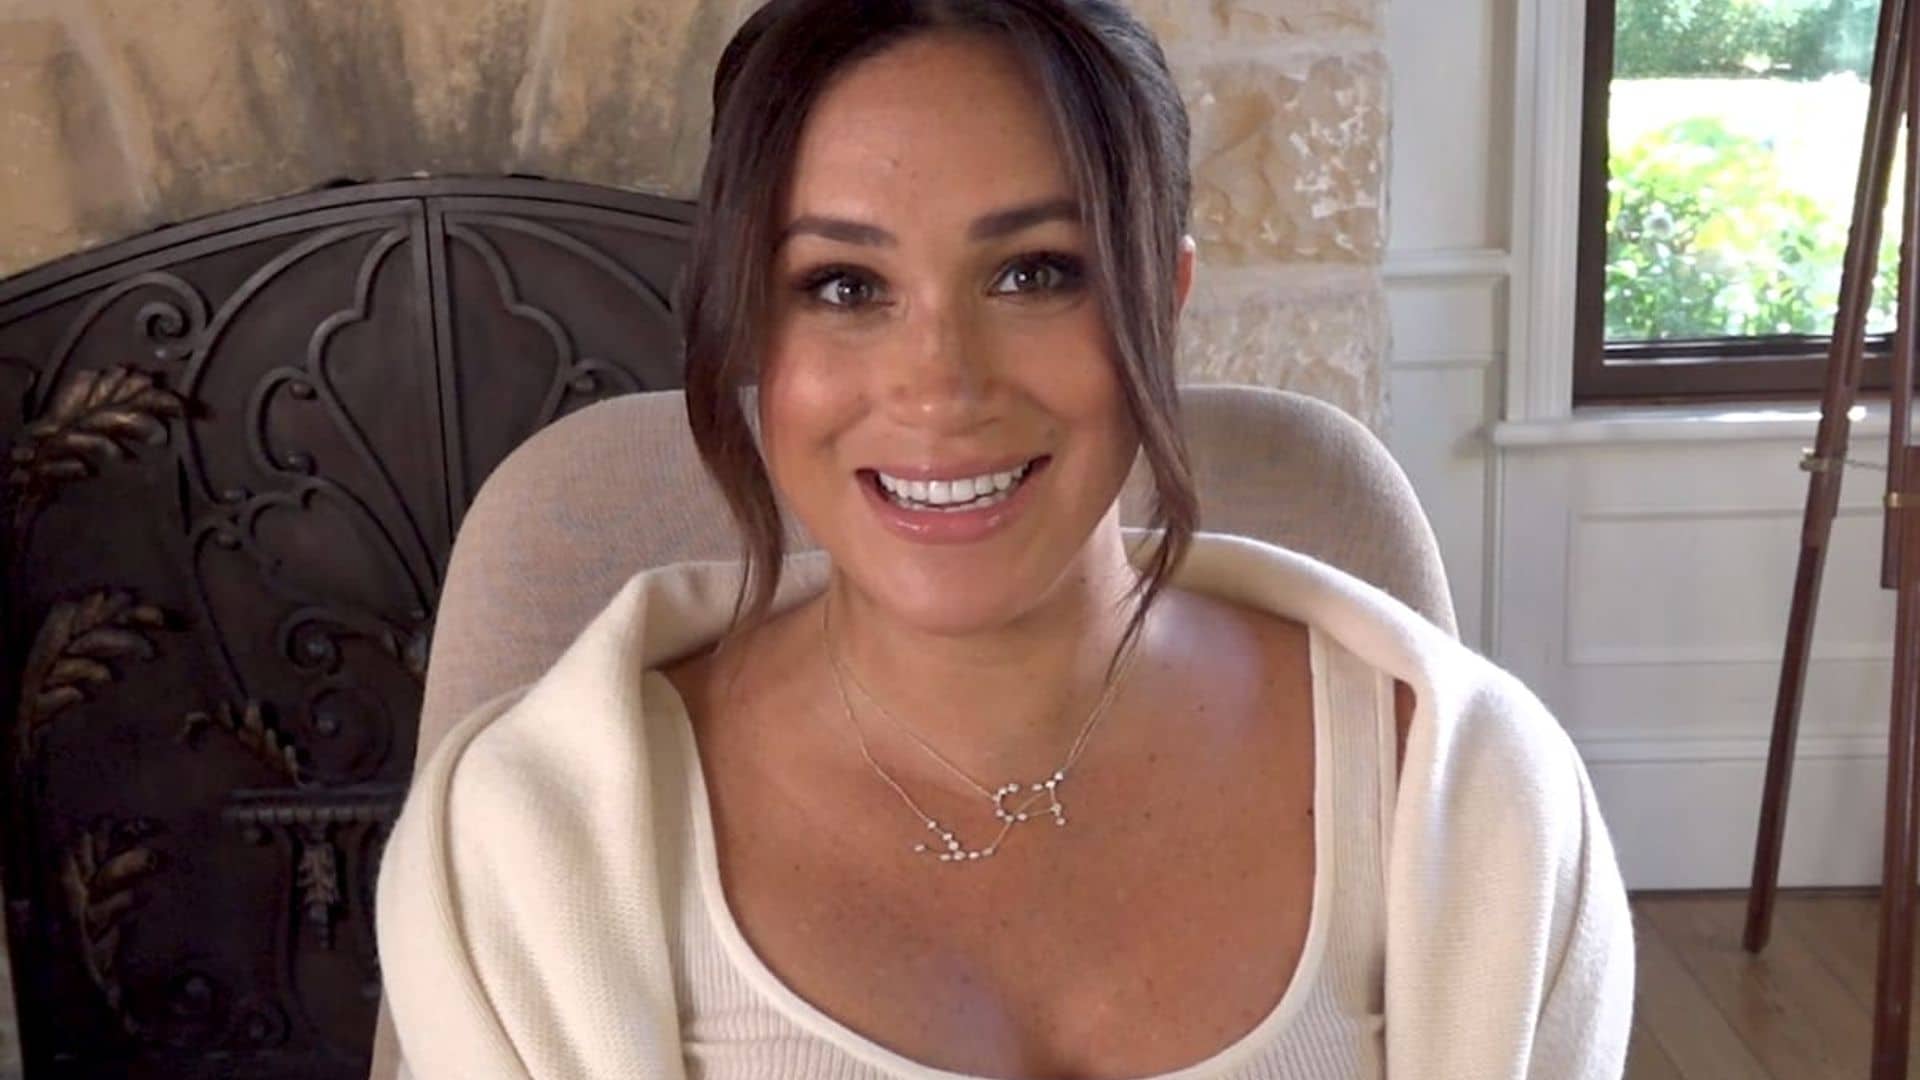 Meghan Markle releases video message on 40th birthday—featuring a hilarious Prince Harry cameo!